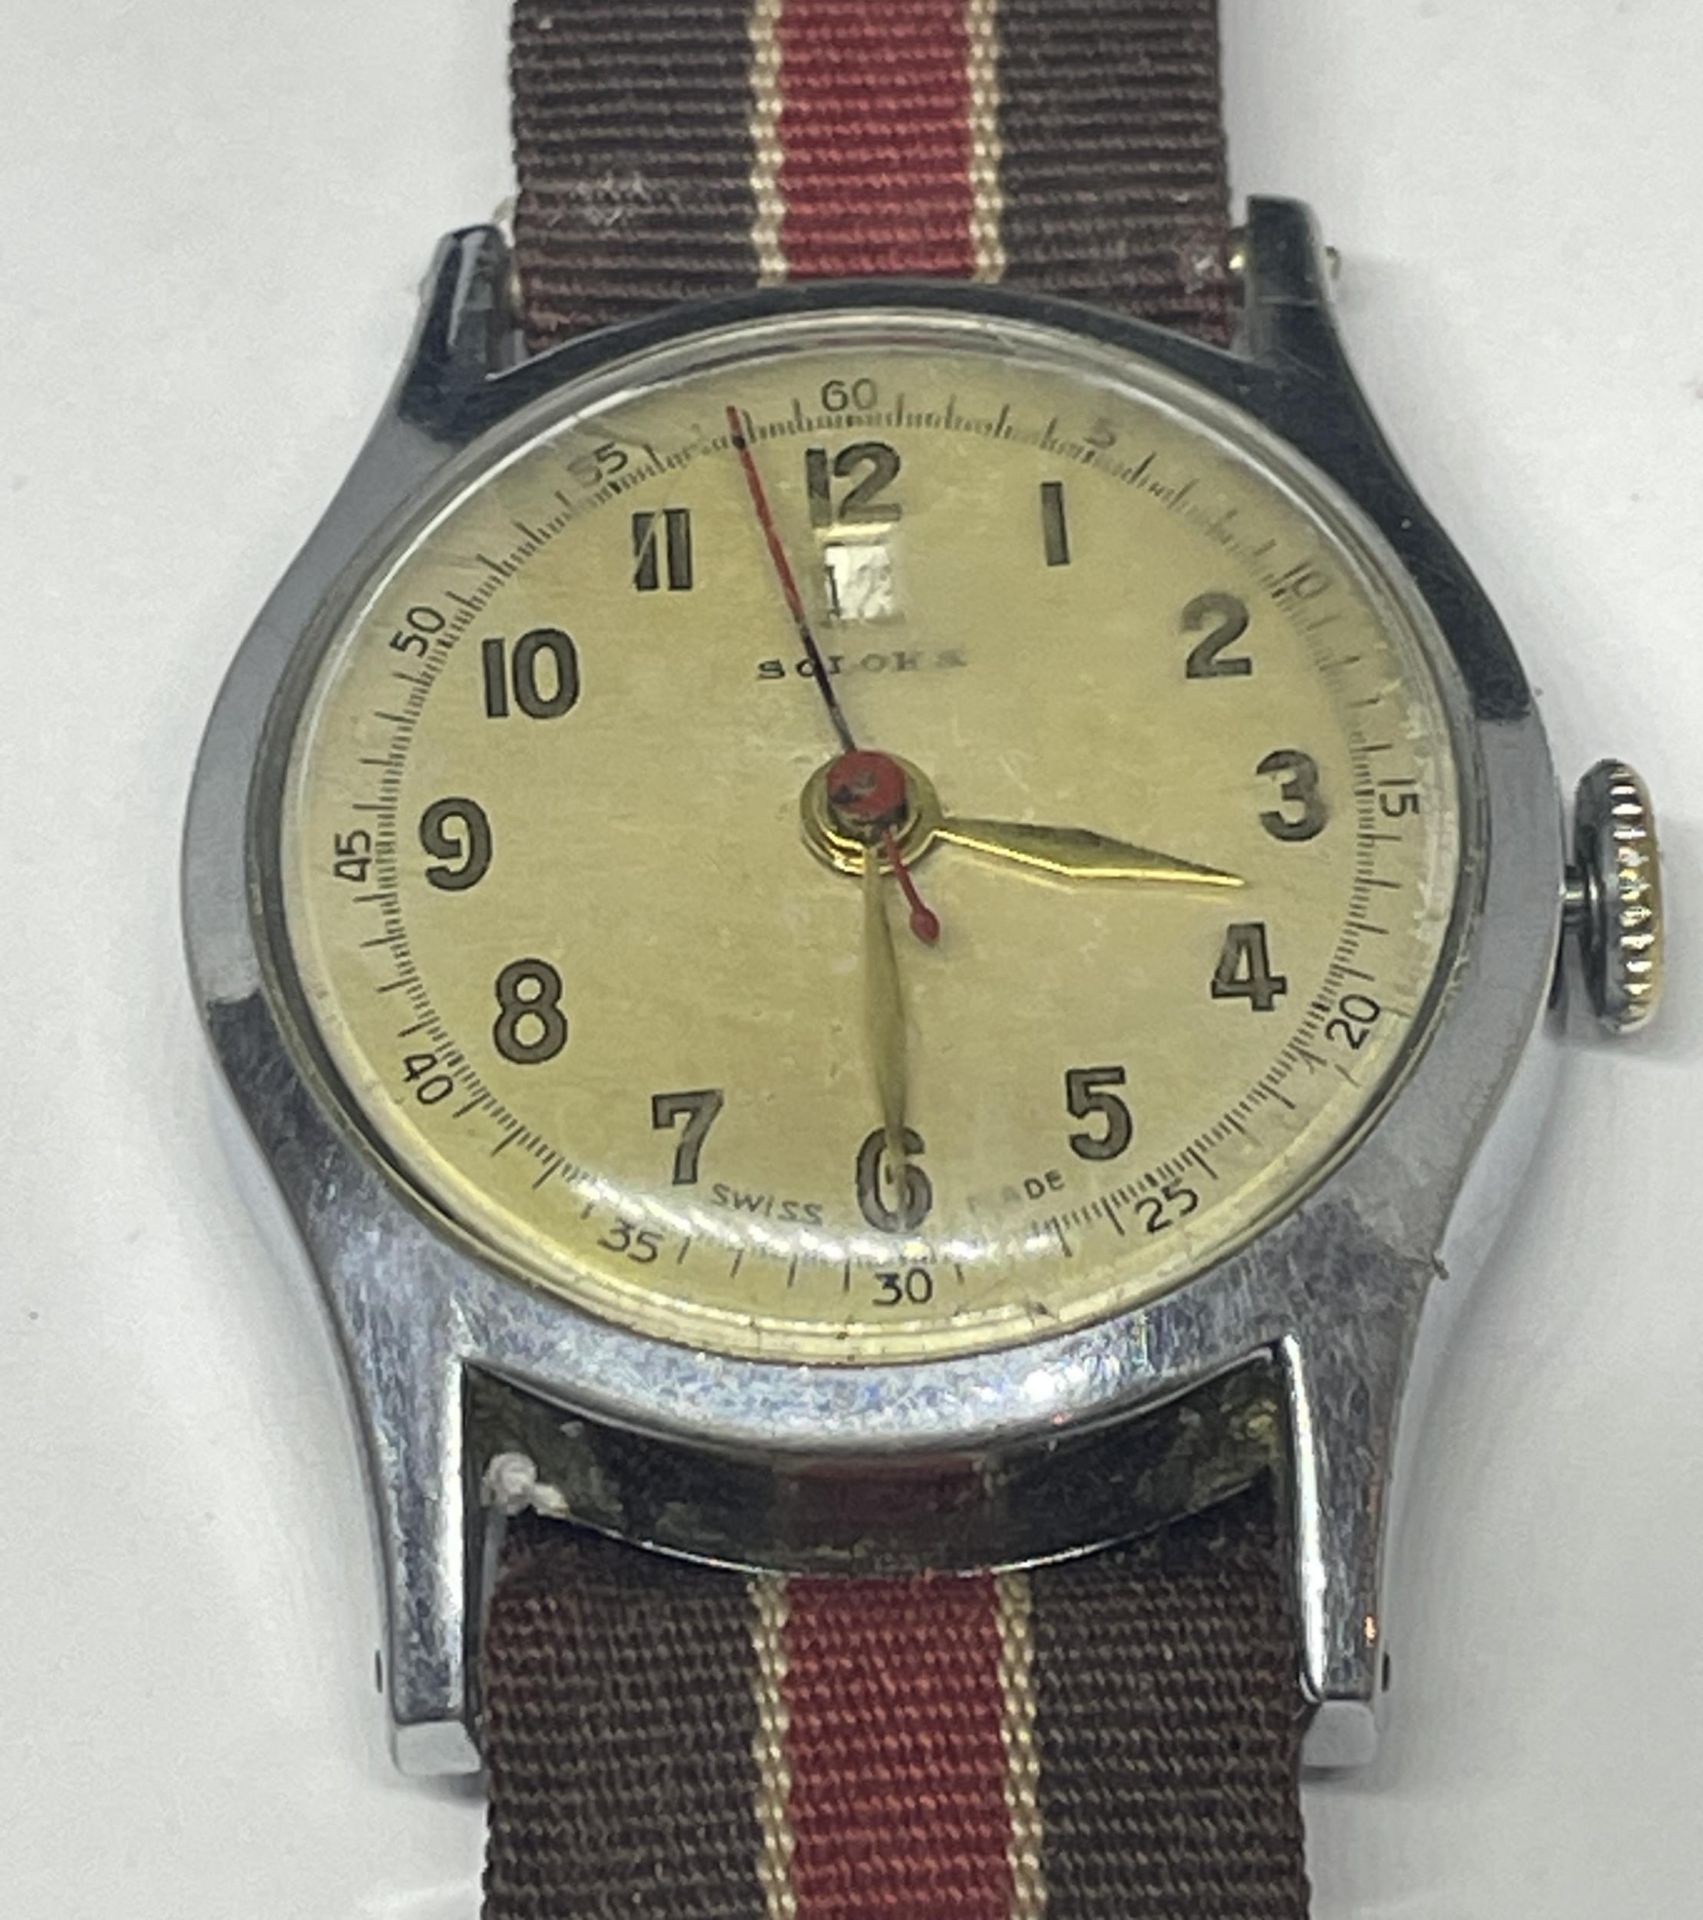 A SOLORA MILITARY STLYE GENTS DATE FUNCTION WRIST WATCH, SEEN WORKING BUT NO WARRANTIES GIVEN